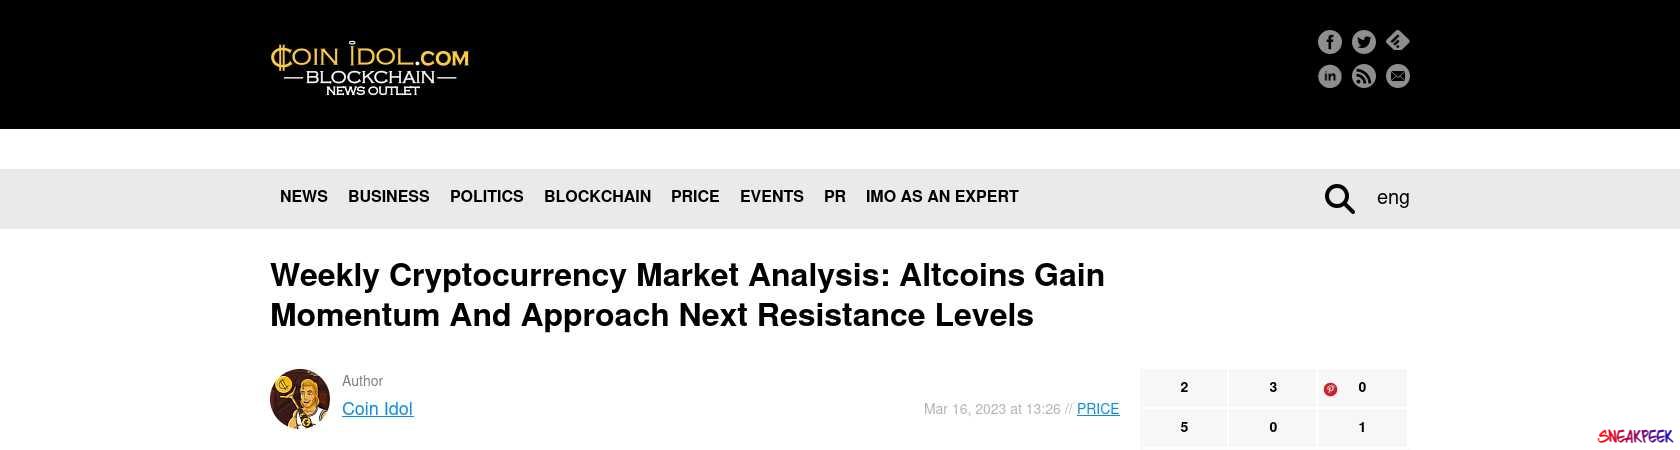 Read the full Article:  ⭲ Weekly Cryptocurrency Market Analysis: Altcoins Gain Momentum And Approach Next Resistance Levels